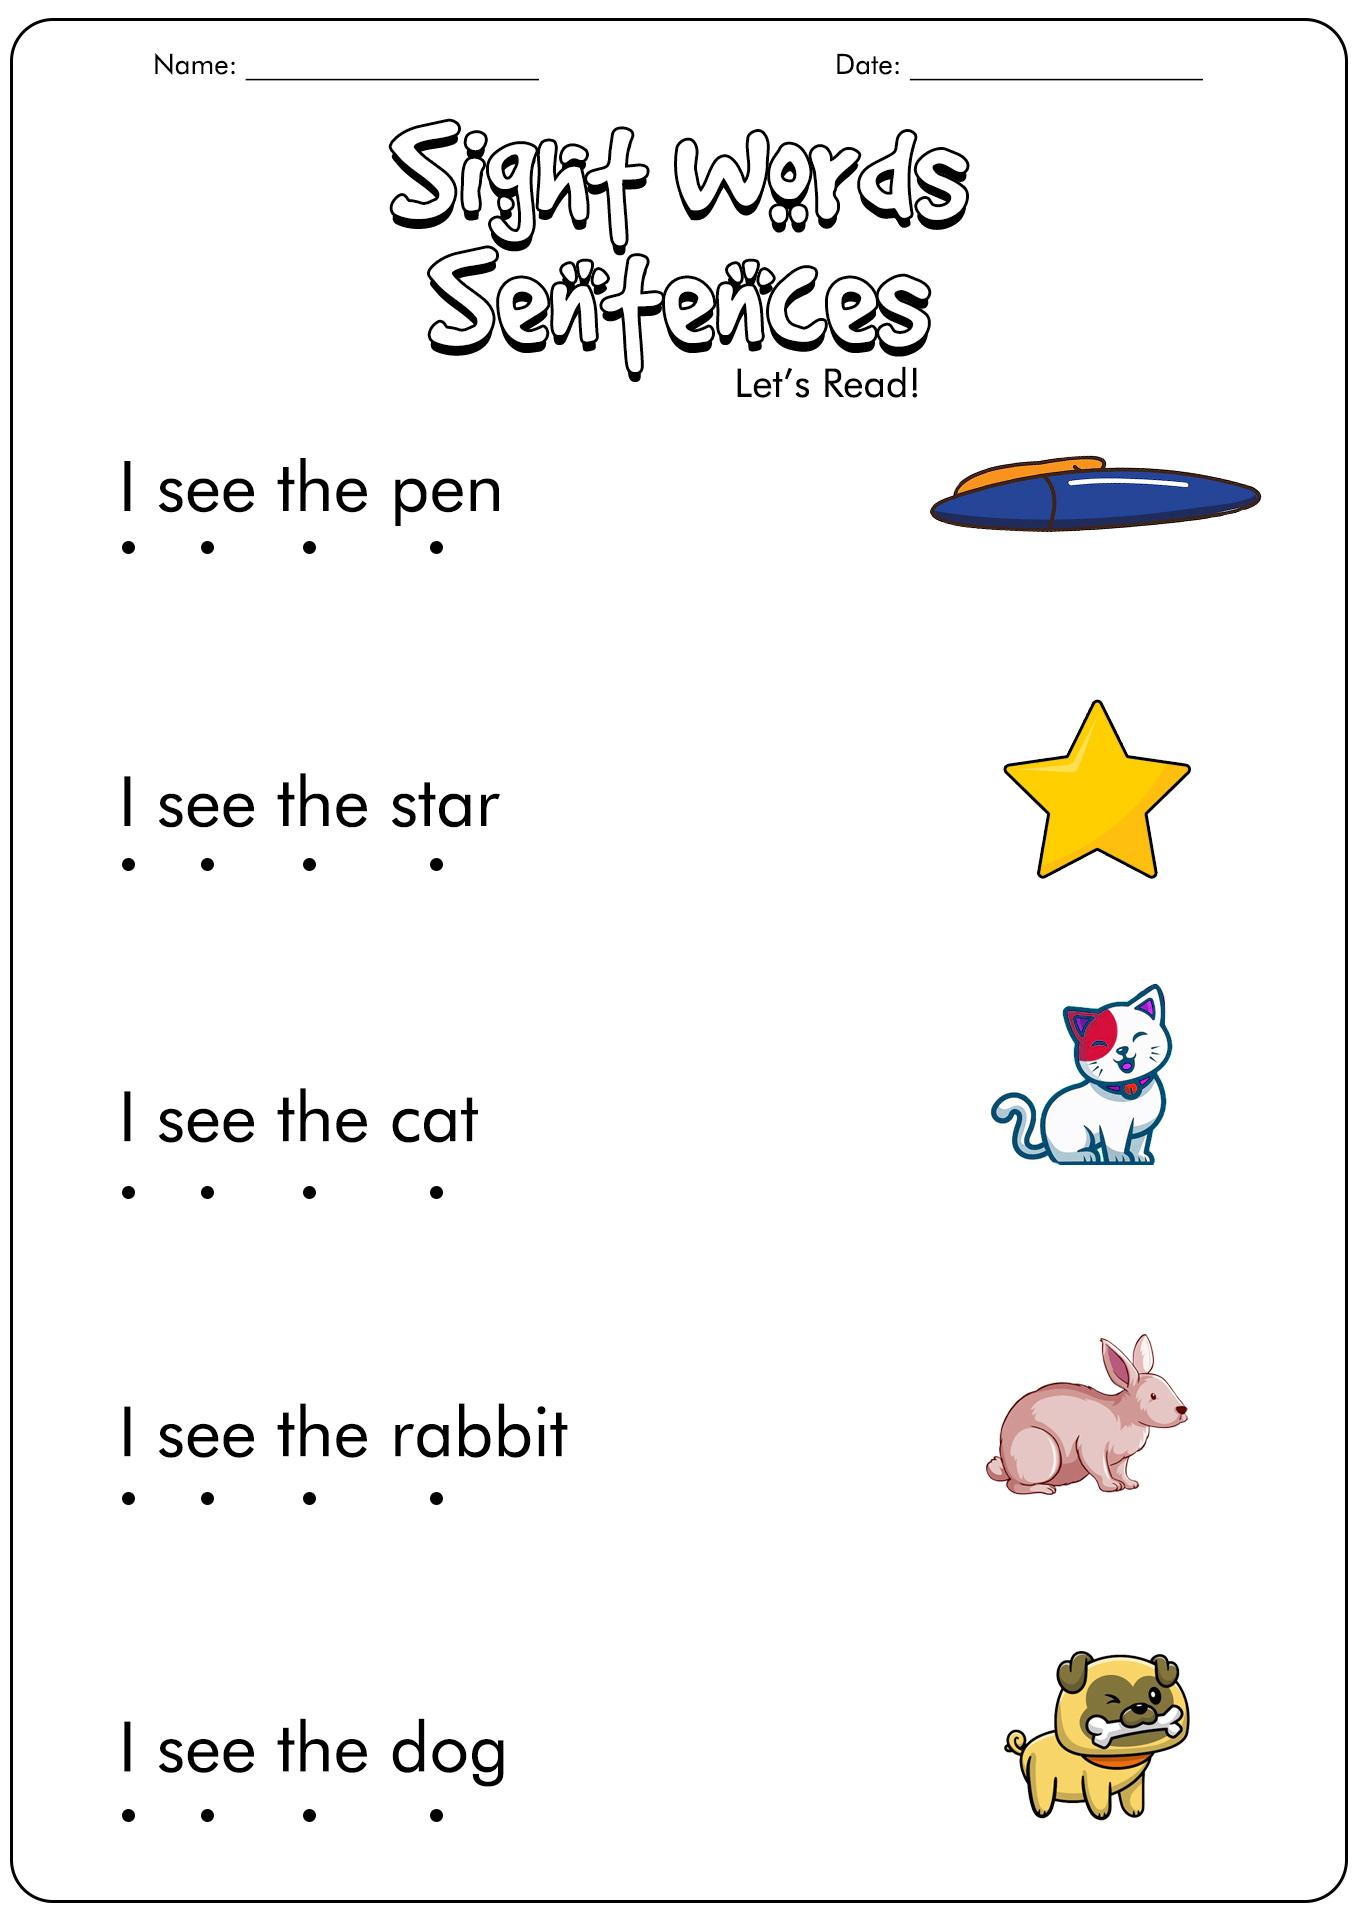 Simple Sentences with Sight Words Image